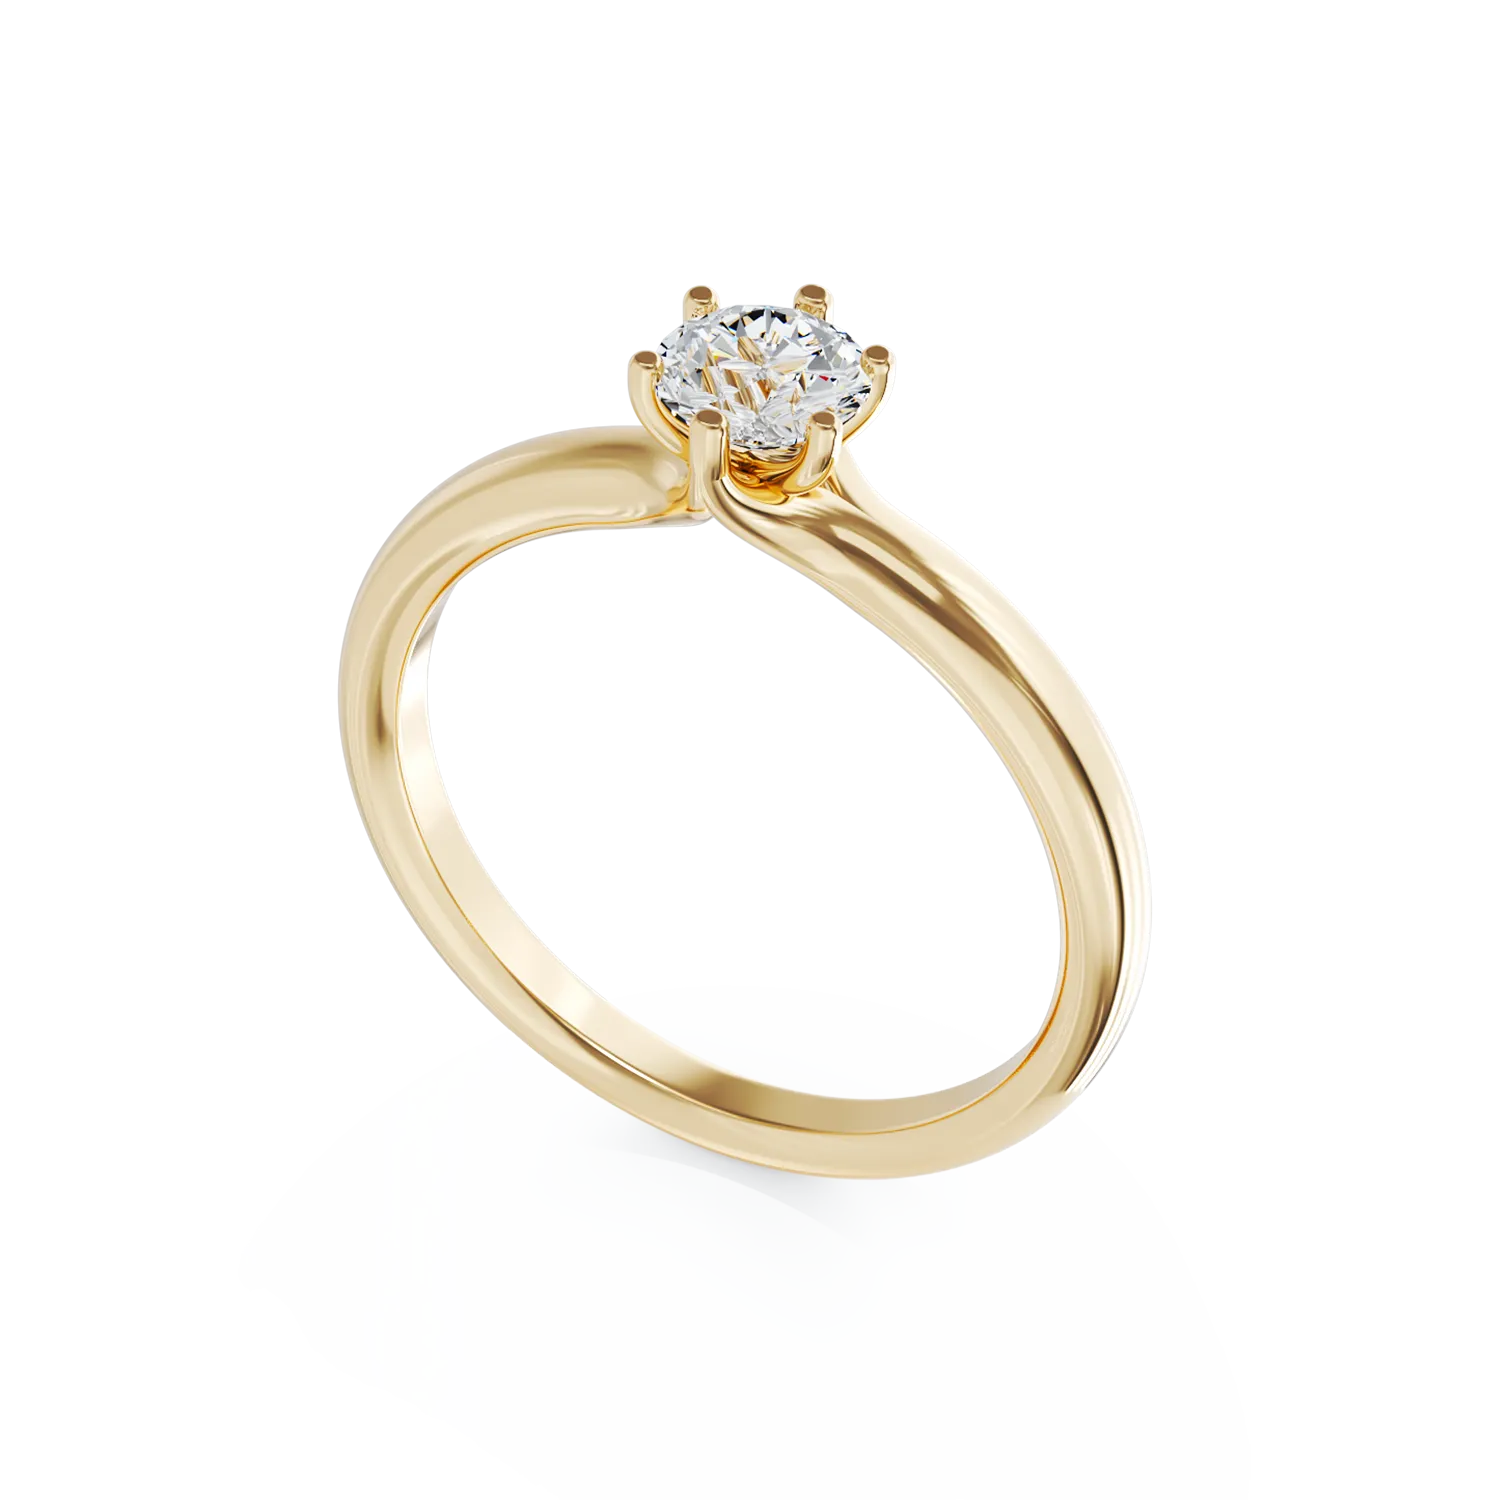 18K yellow gold engagement ring with 0.5ct diamond